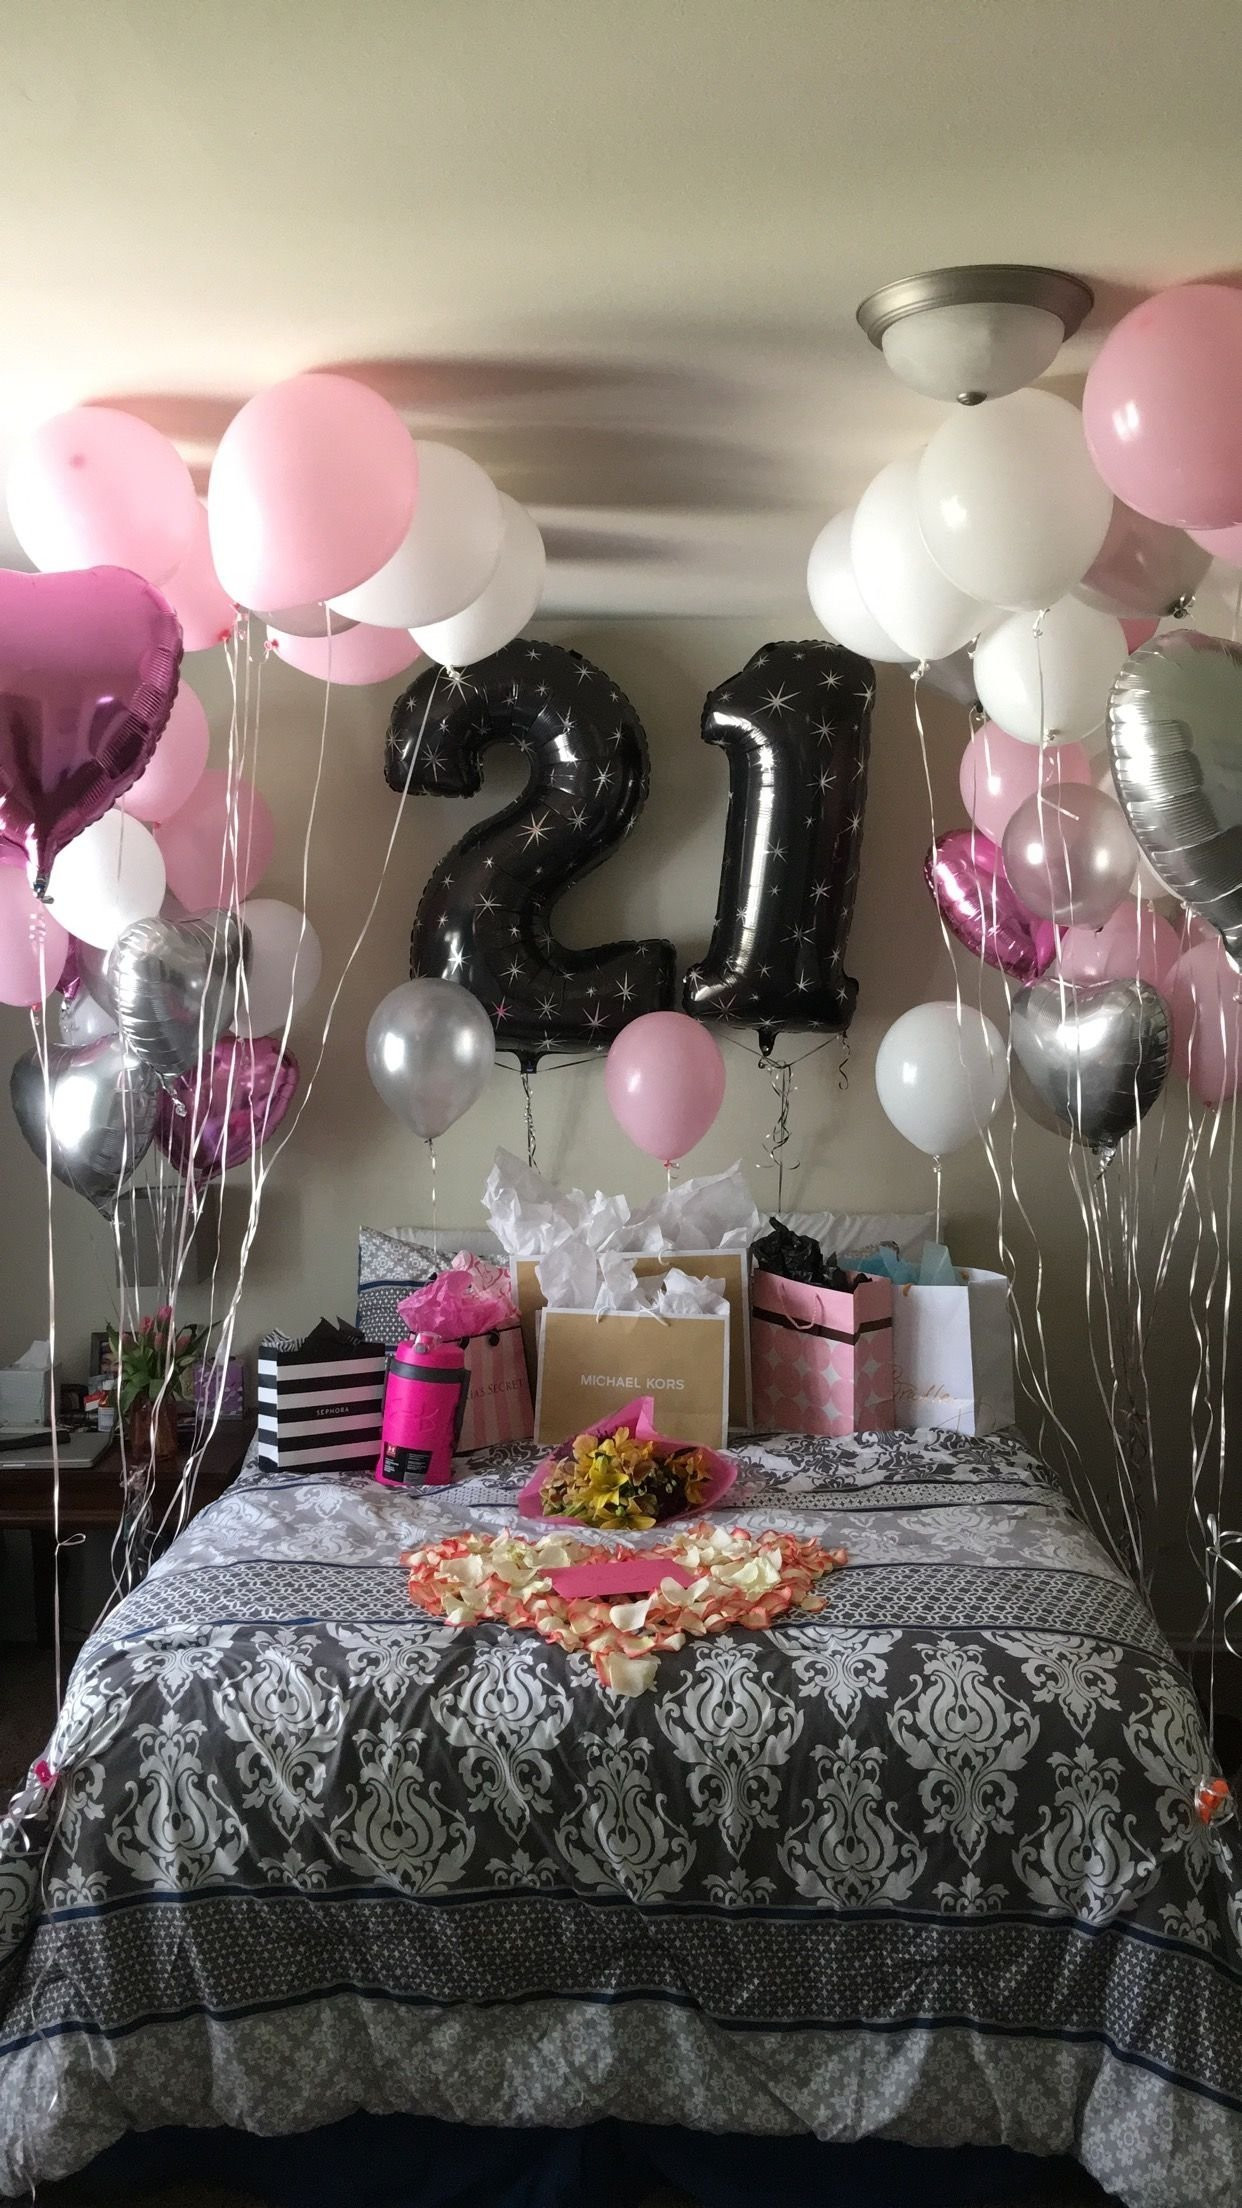 Birthday Gift Ideas For A Girlfriend
 10 Fashionable Birthday Surprise Ideas For Girlfriend 2020